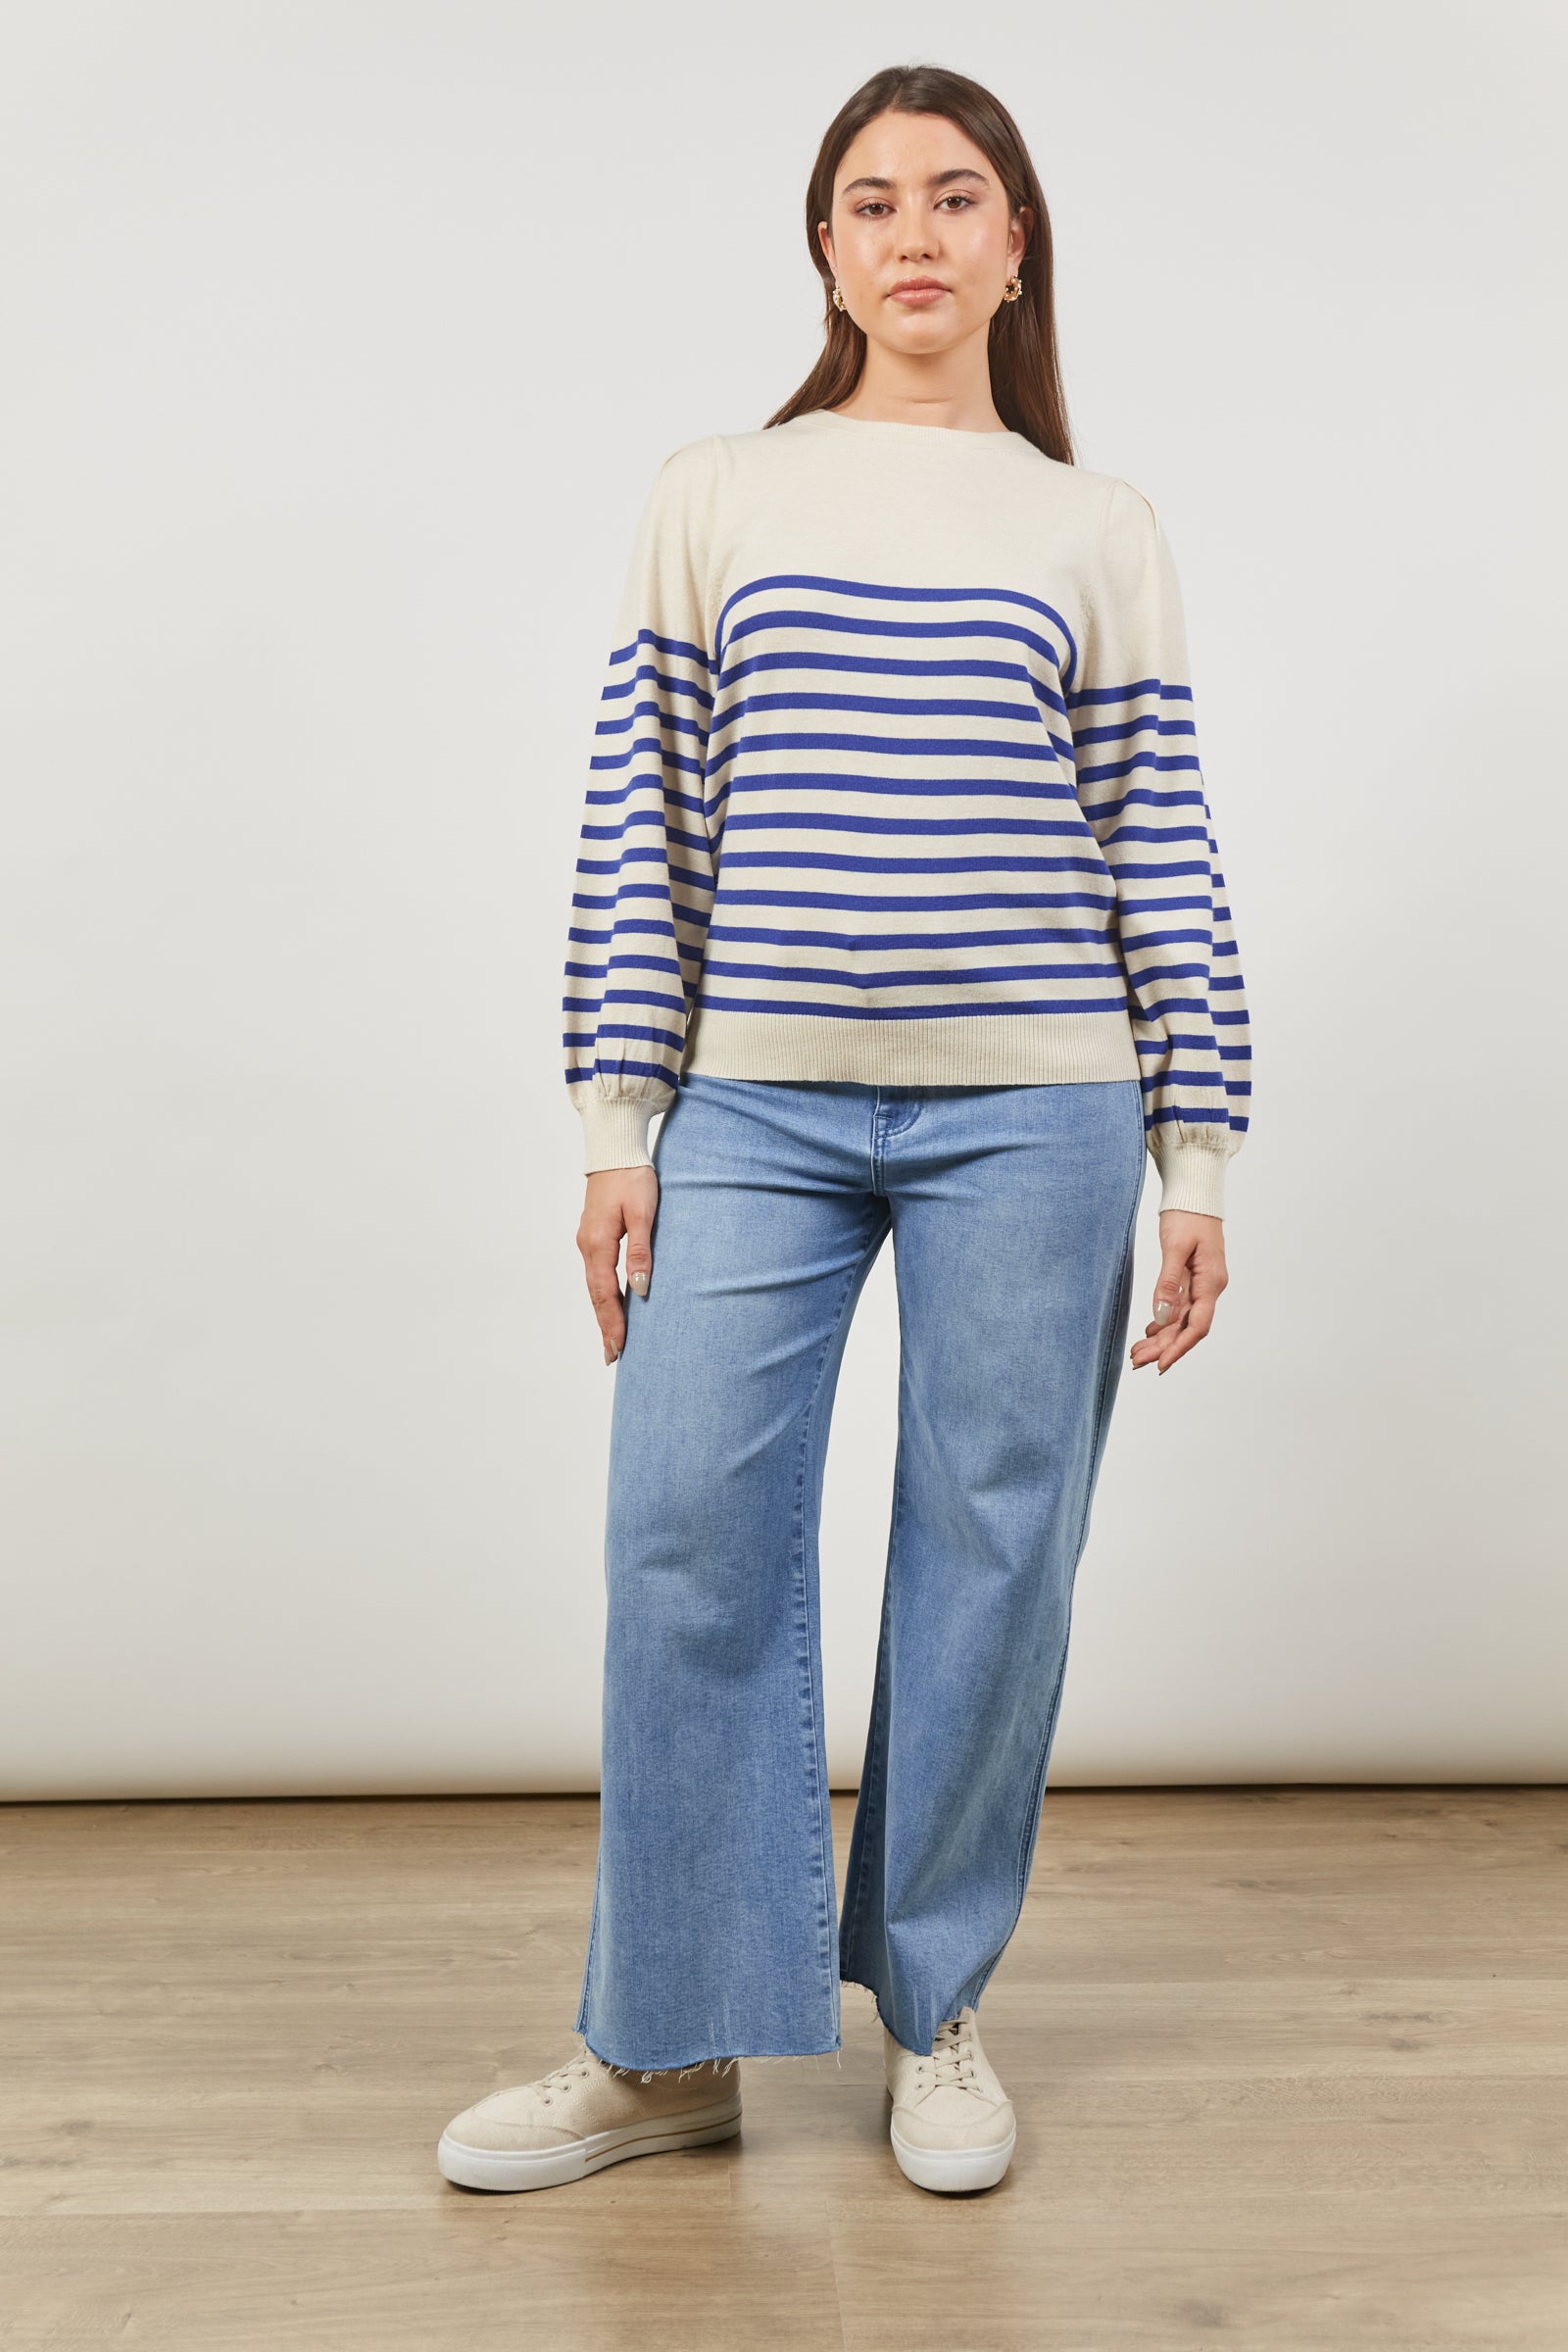 Cosmo Stripe Jumper - Creme - Isle of Mine Clothing - Knit Jumper